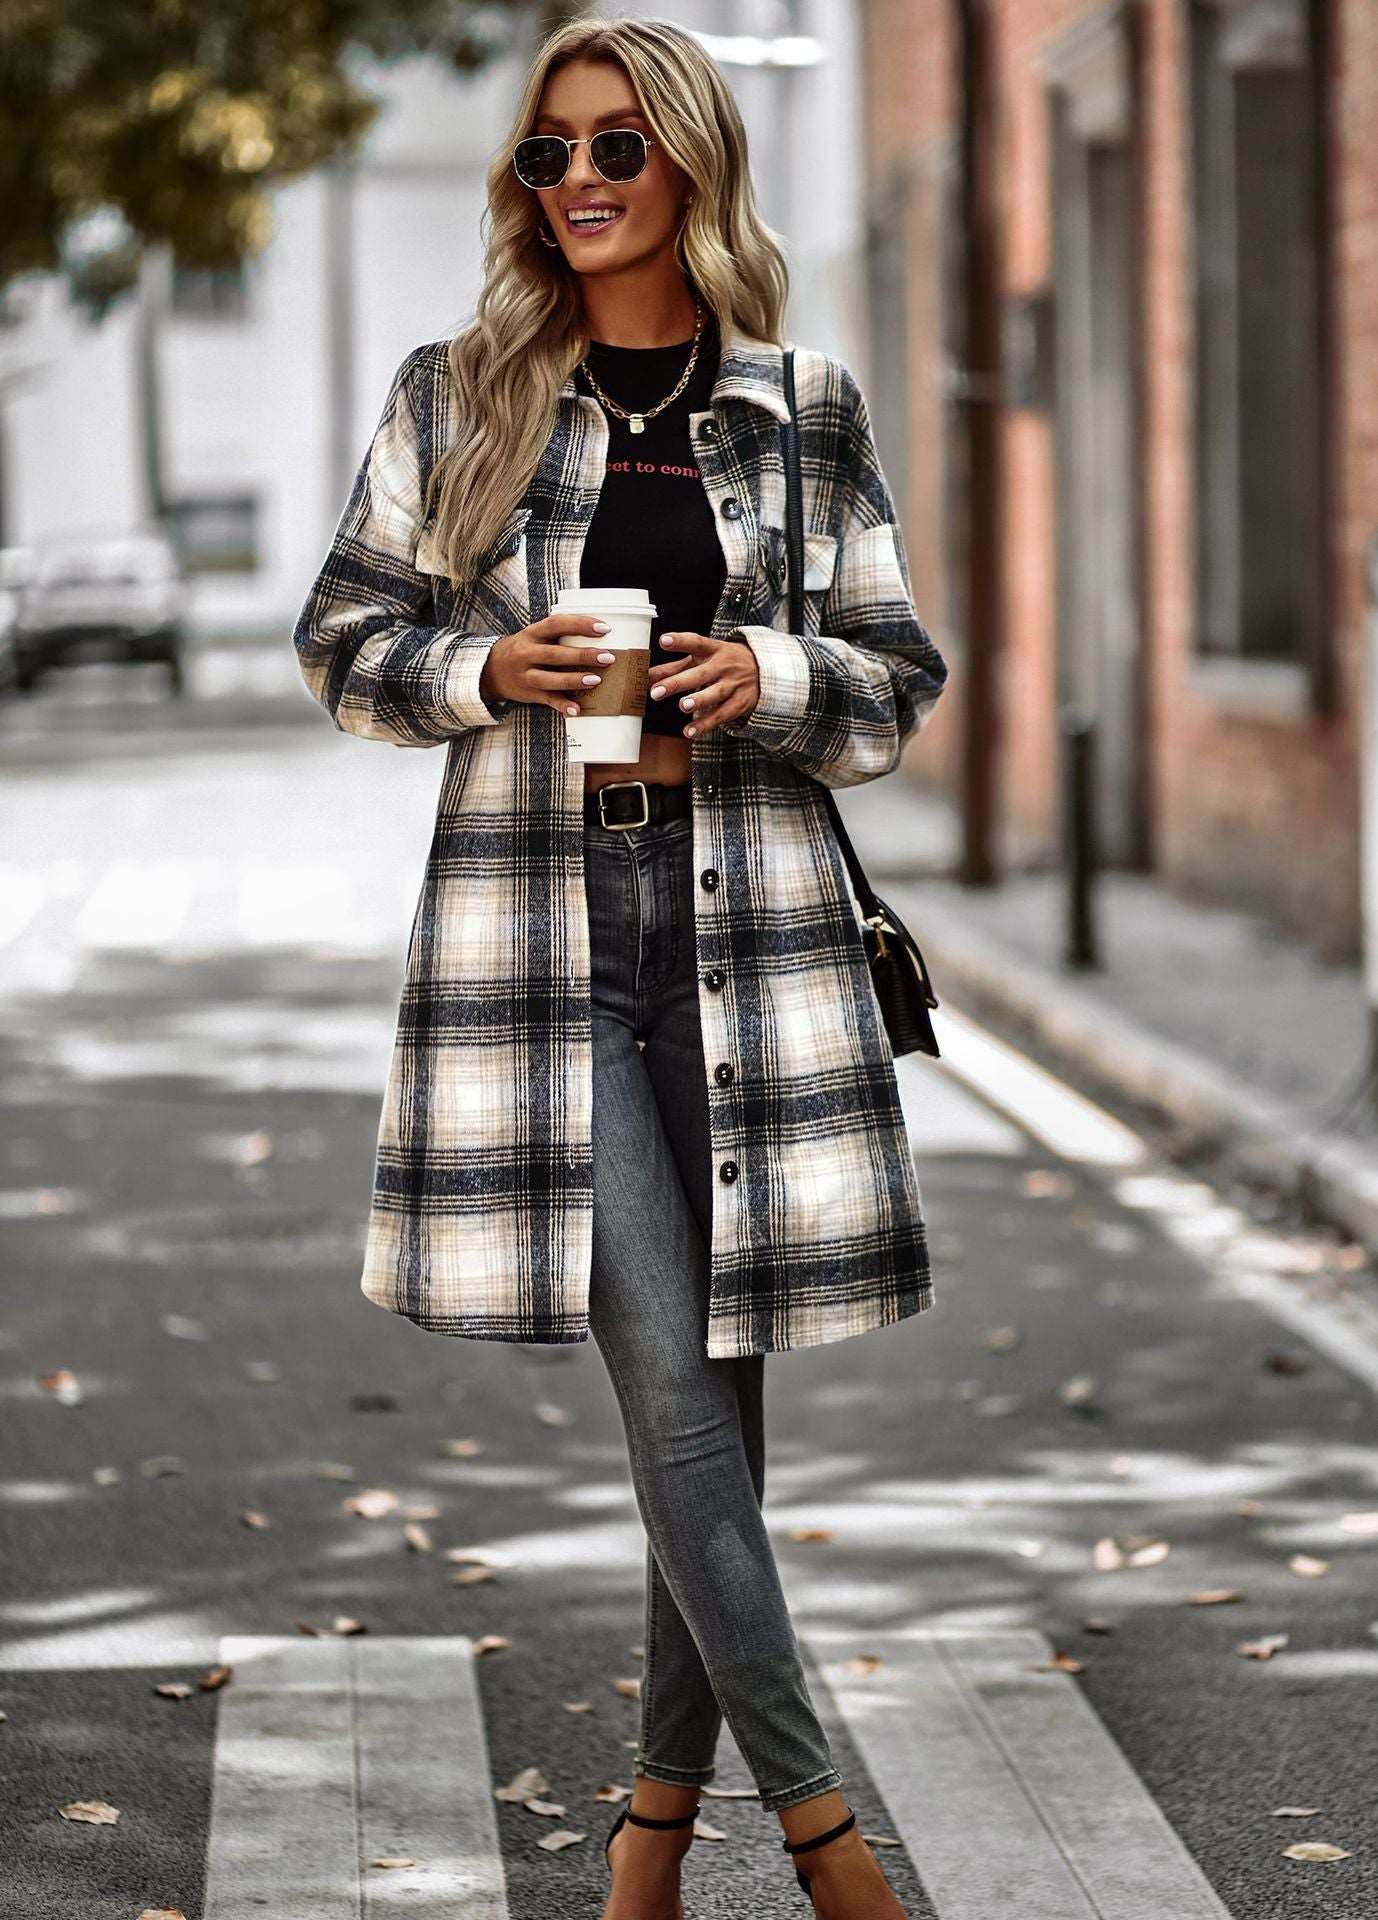 Women's Long Sleeve Button Down Jackets Plaid Flannel Shirts Tops Casual Lapel V Neck Oversized Shackets Blouses Top